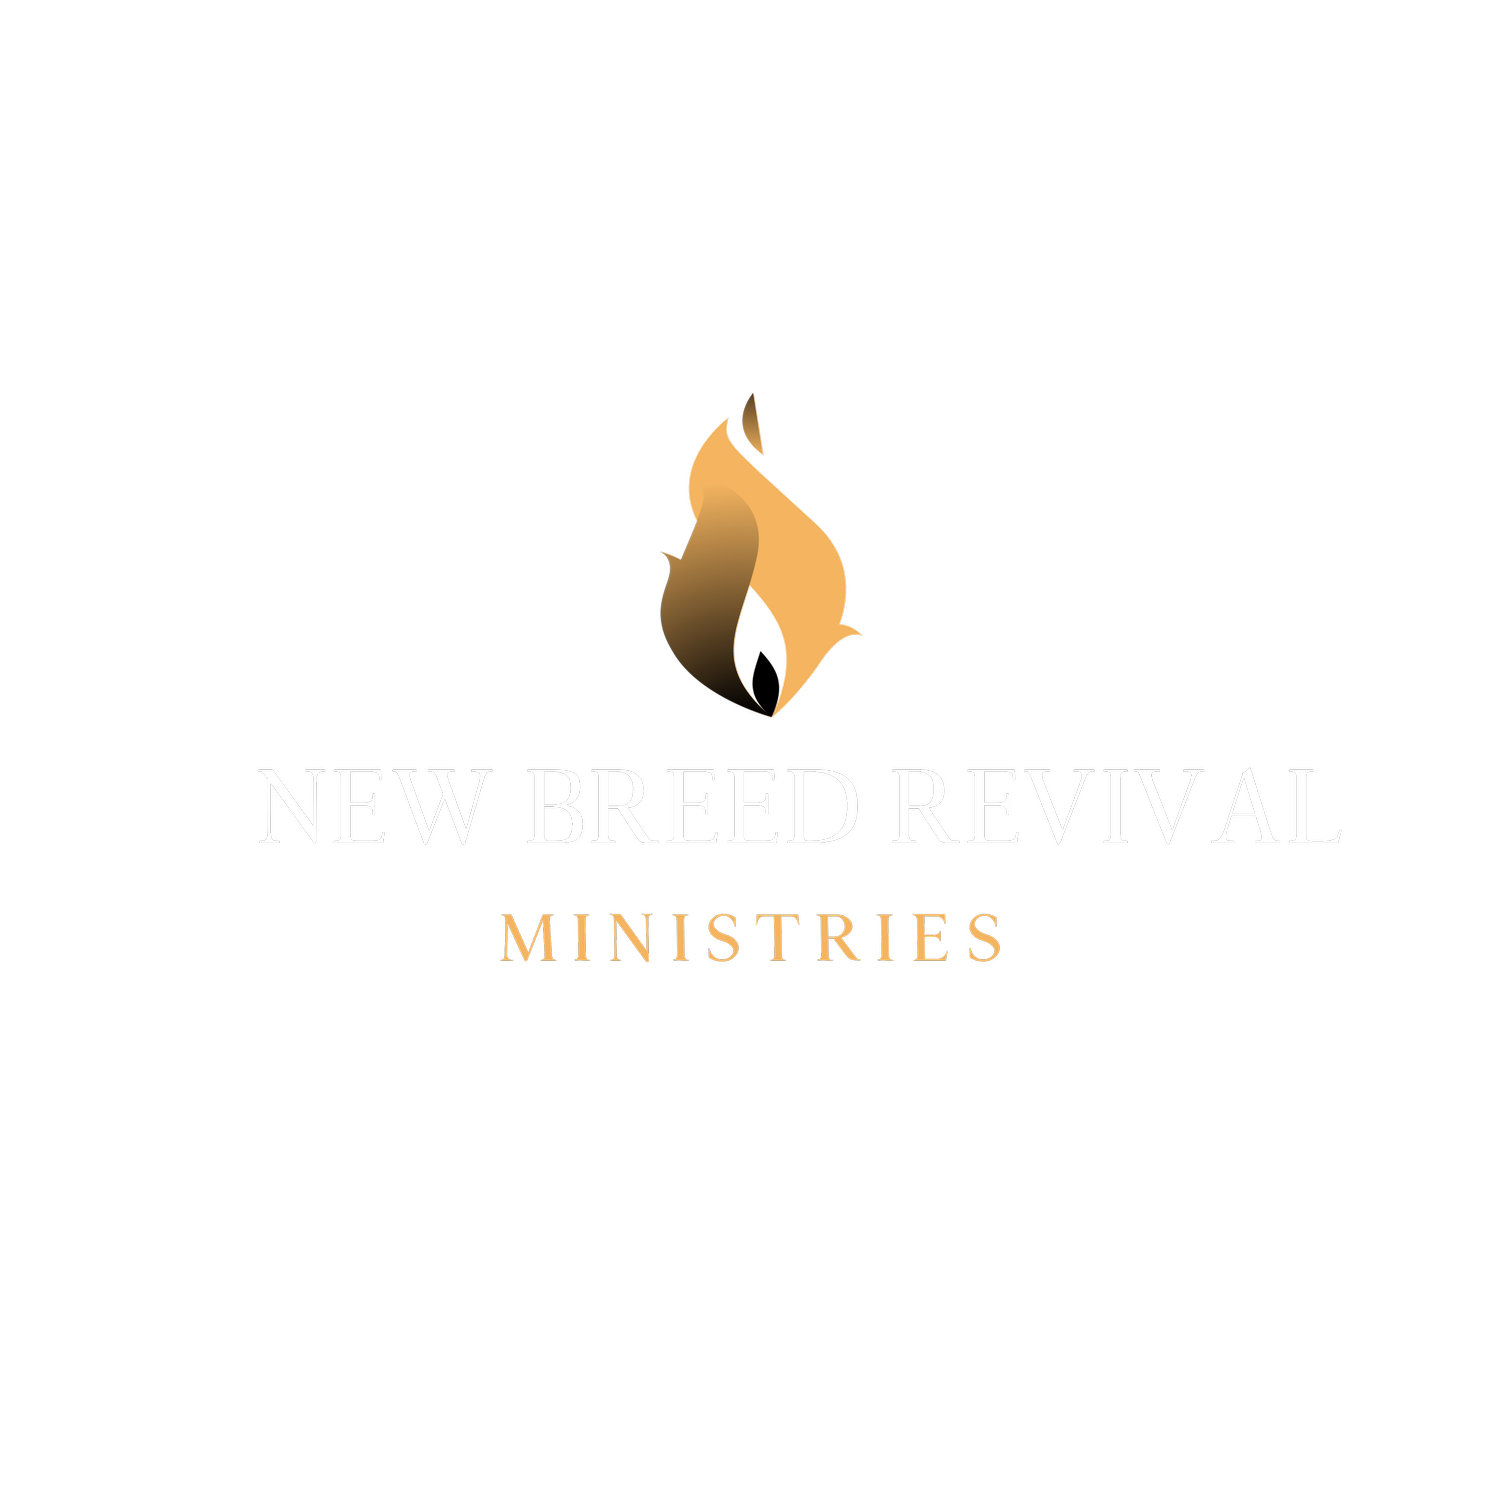 New Breed Revival Ministries